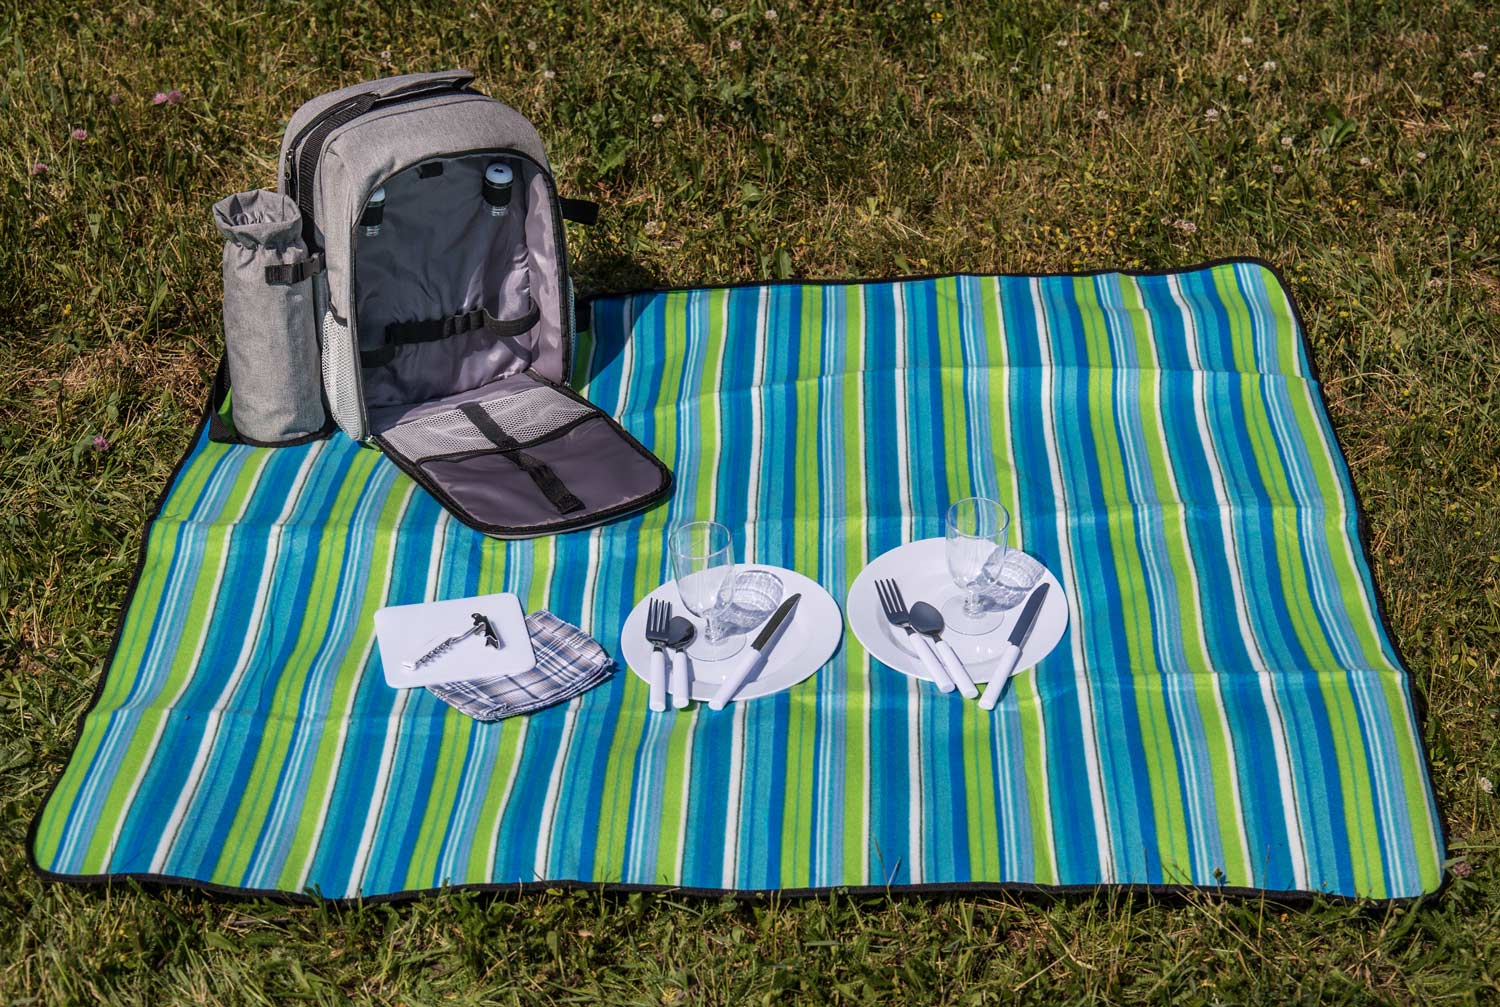 Picnic backpack with a blanket